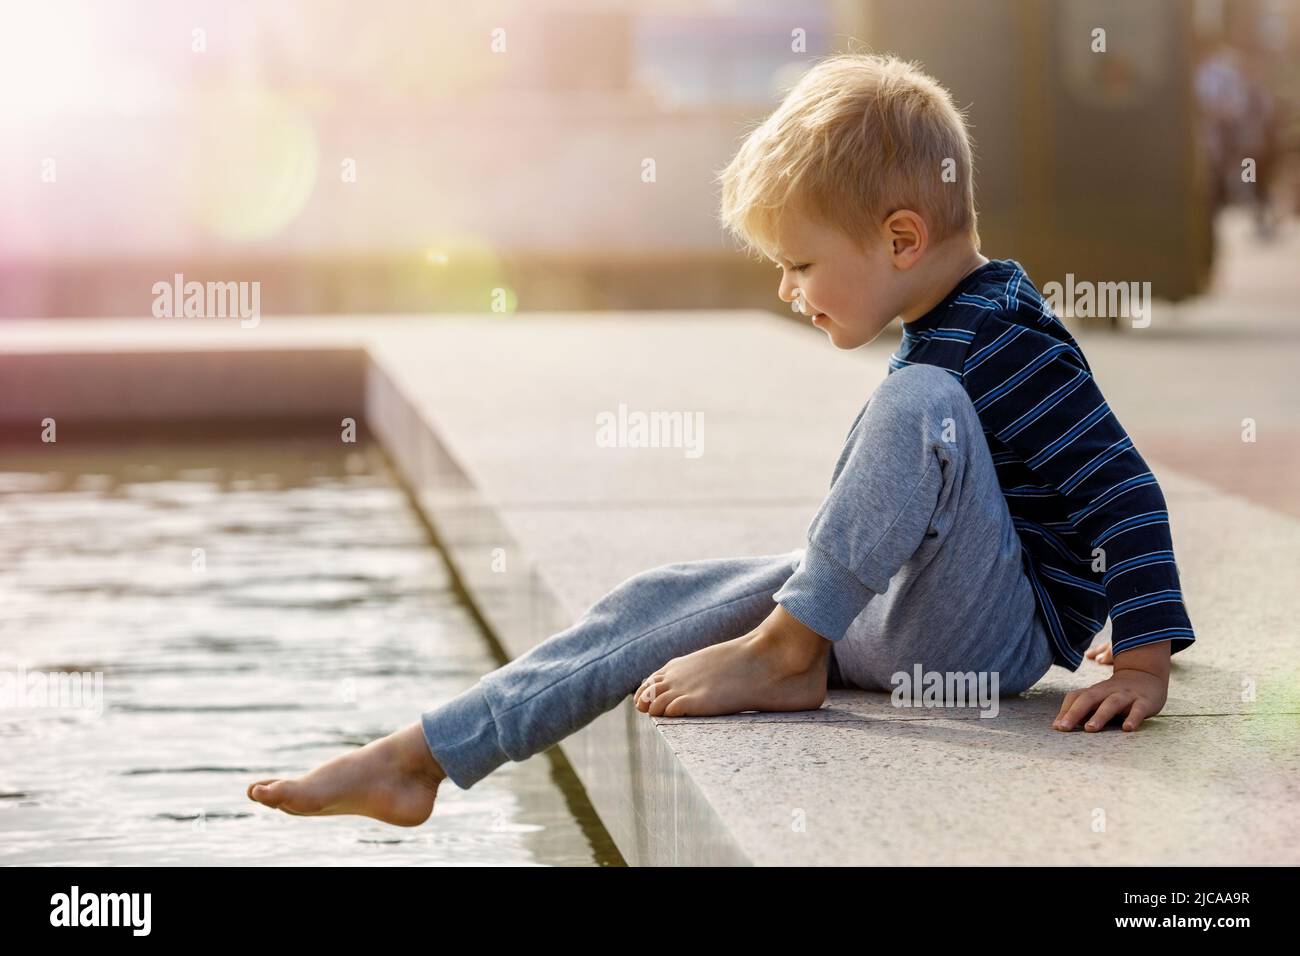 A cute little boy, barefoot, wants to climb into the water at the city fountain during the summer. Stock Photo